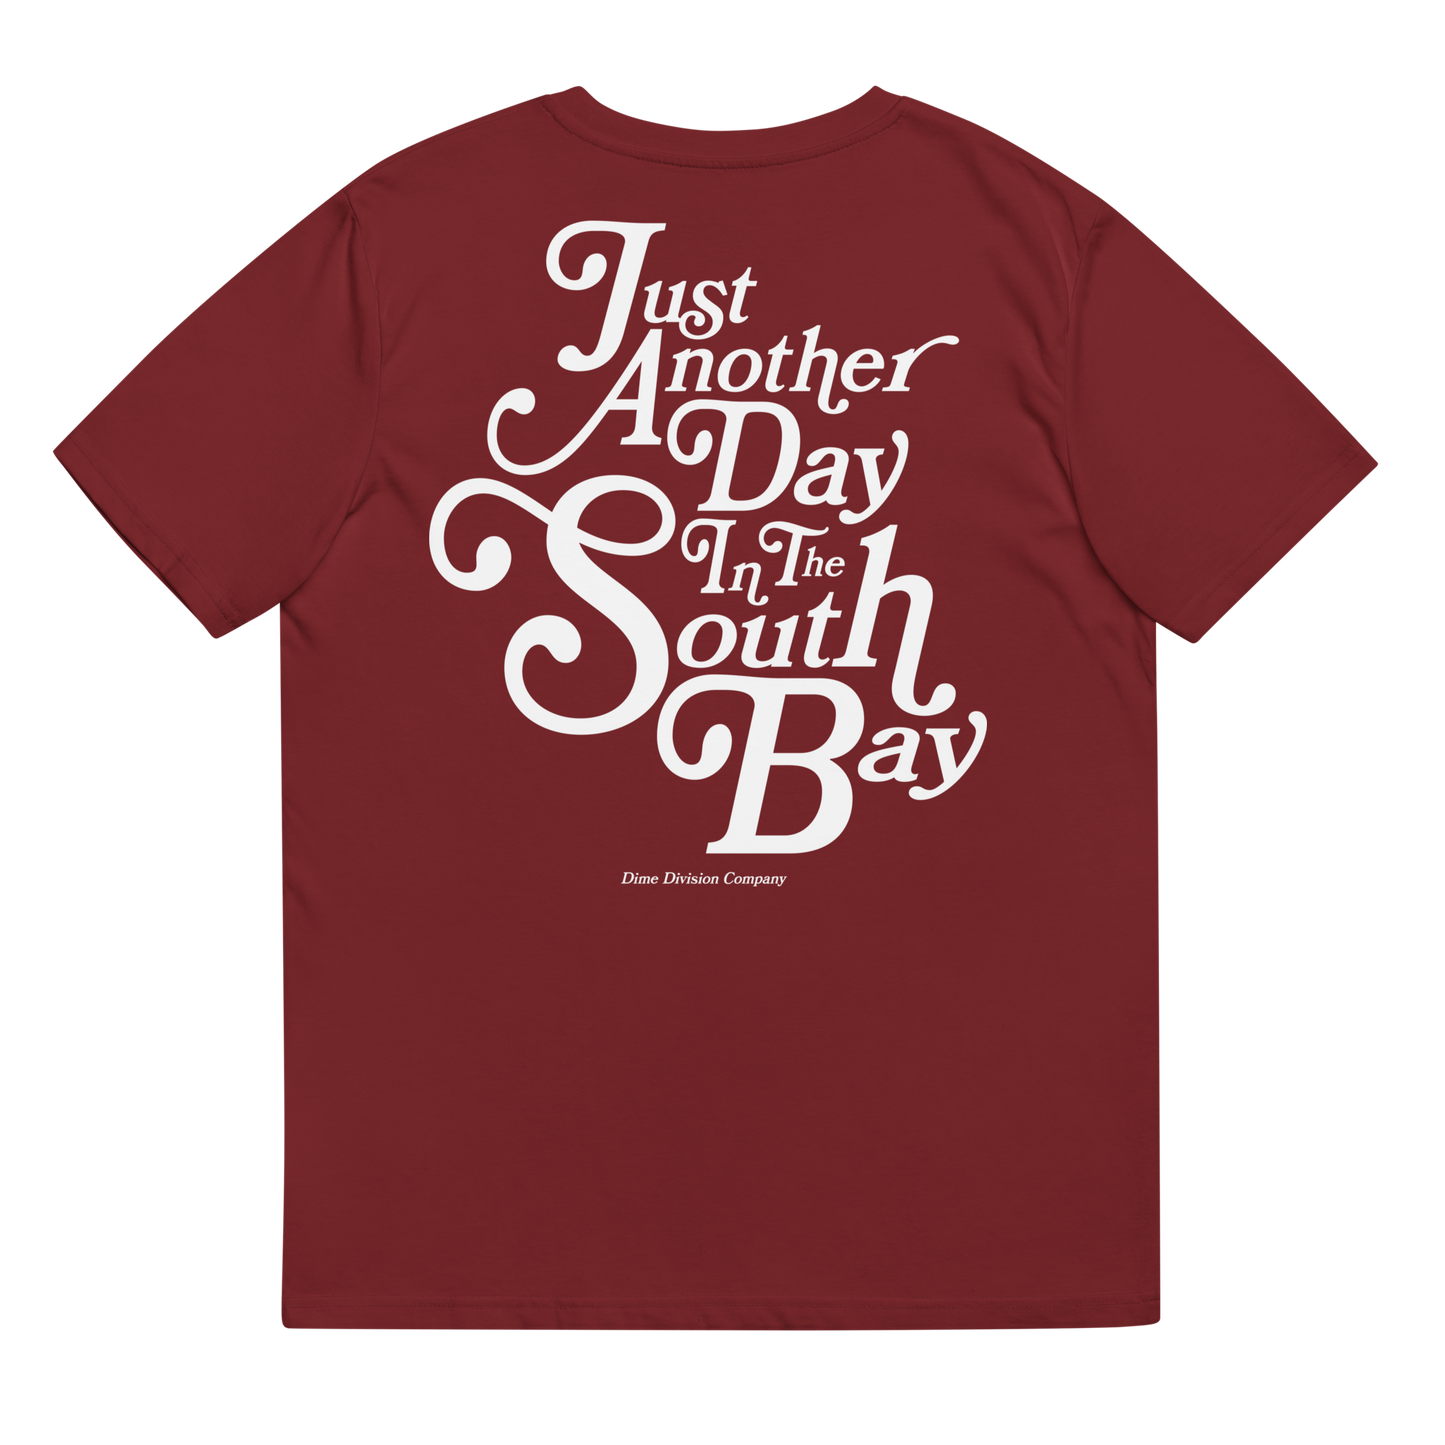 Just Another Day - Southbay Premium Tee